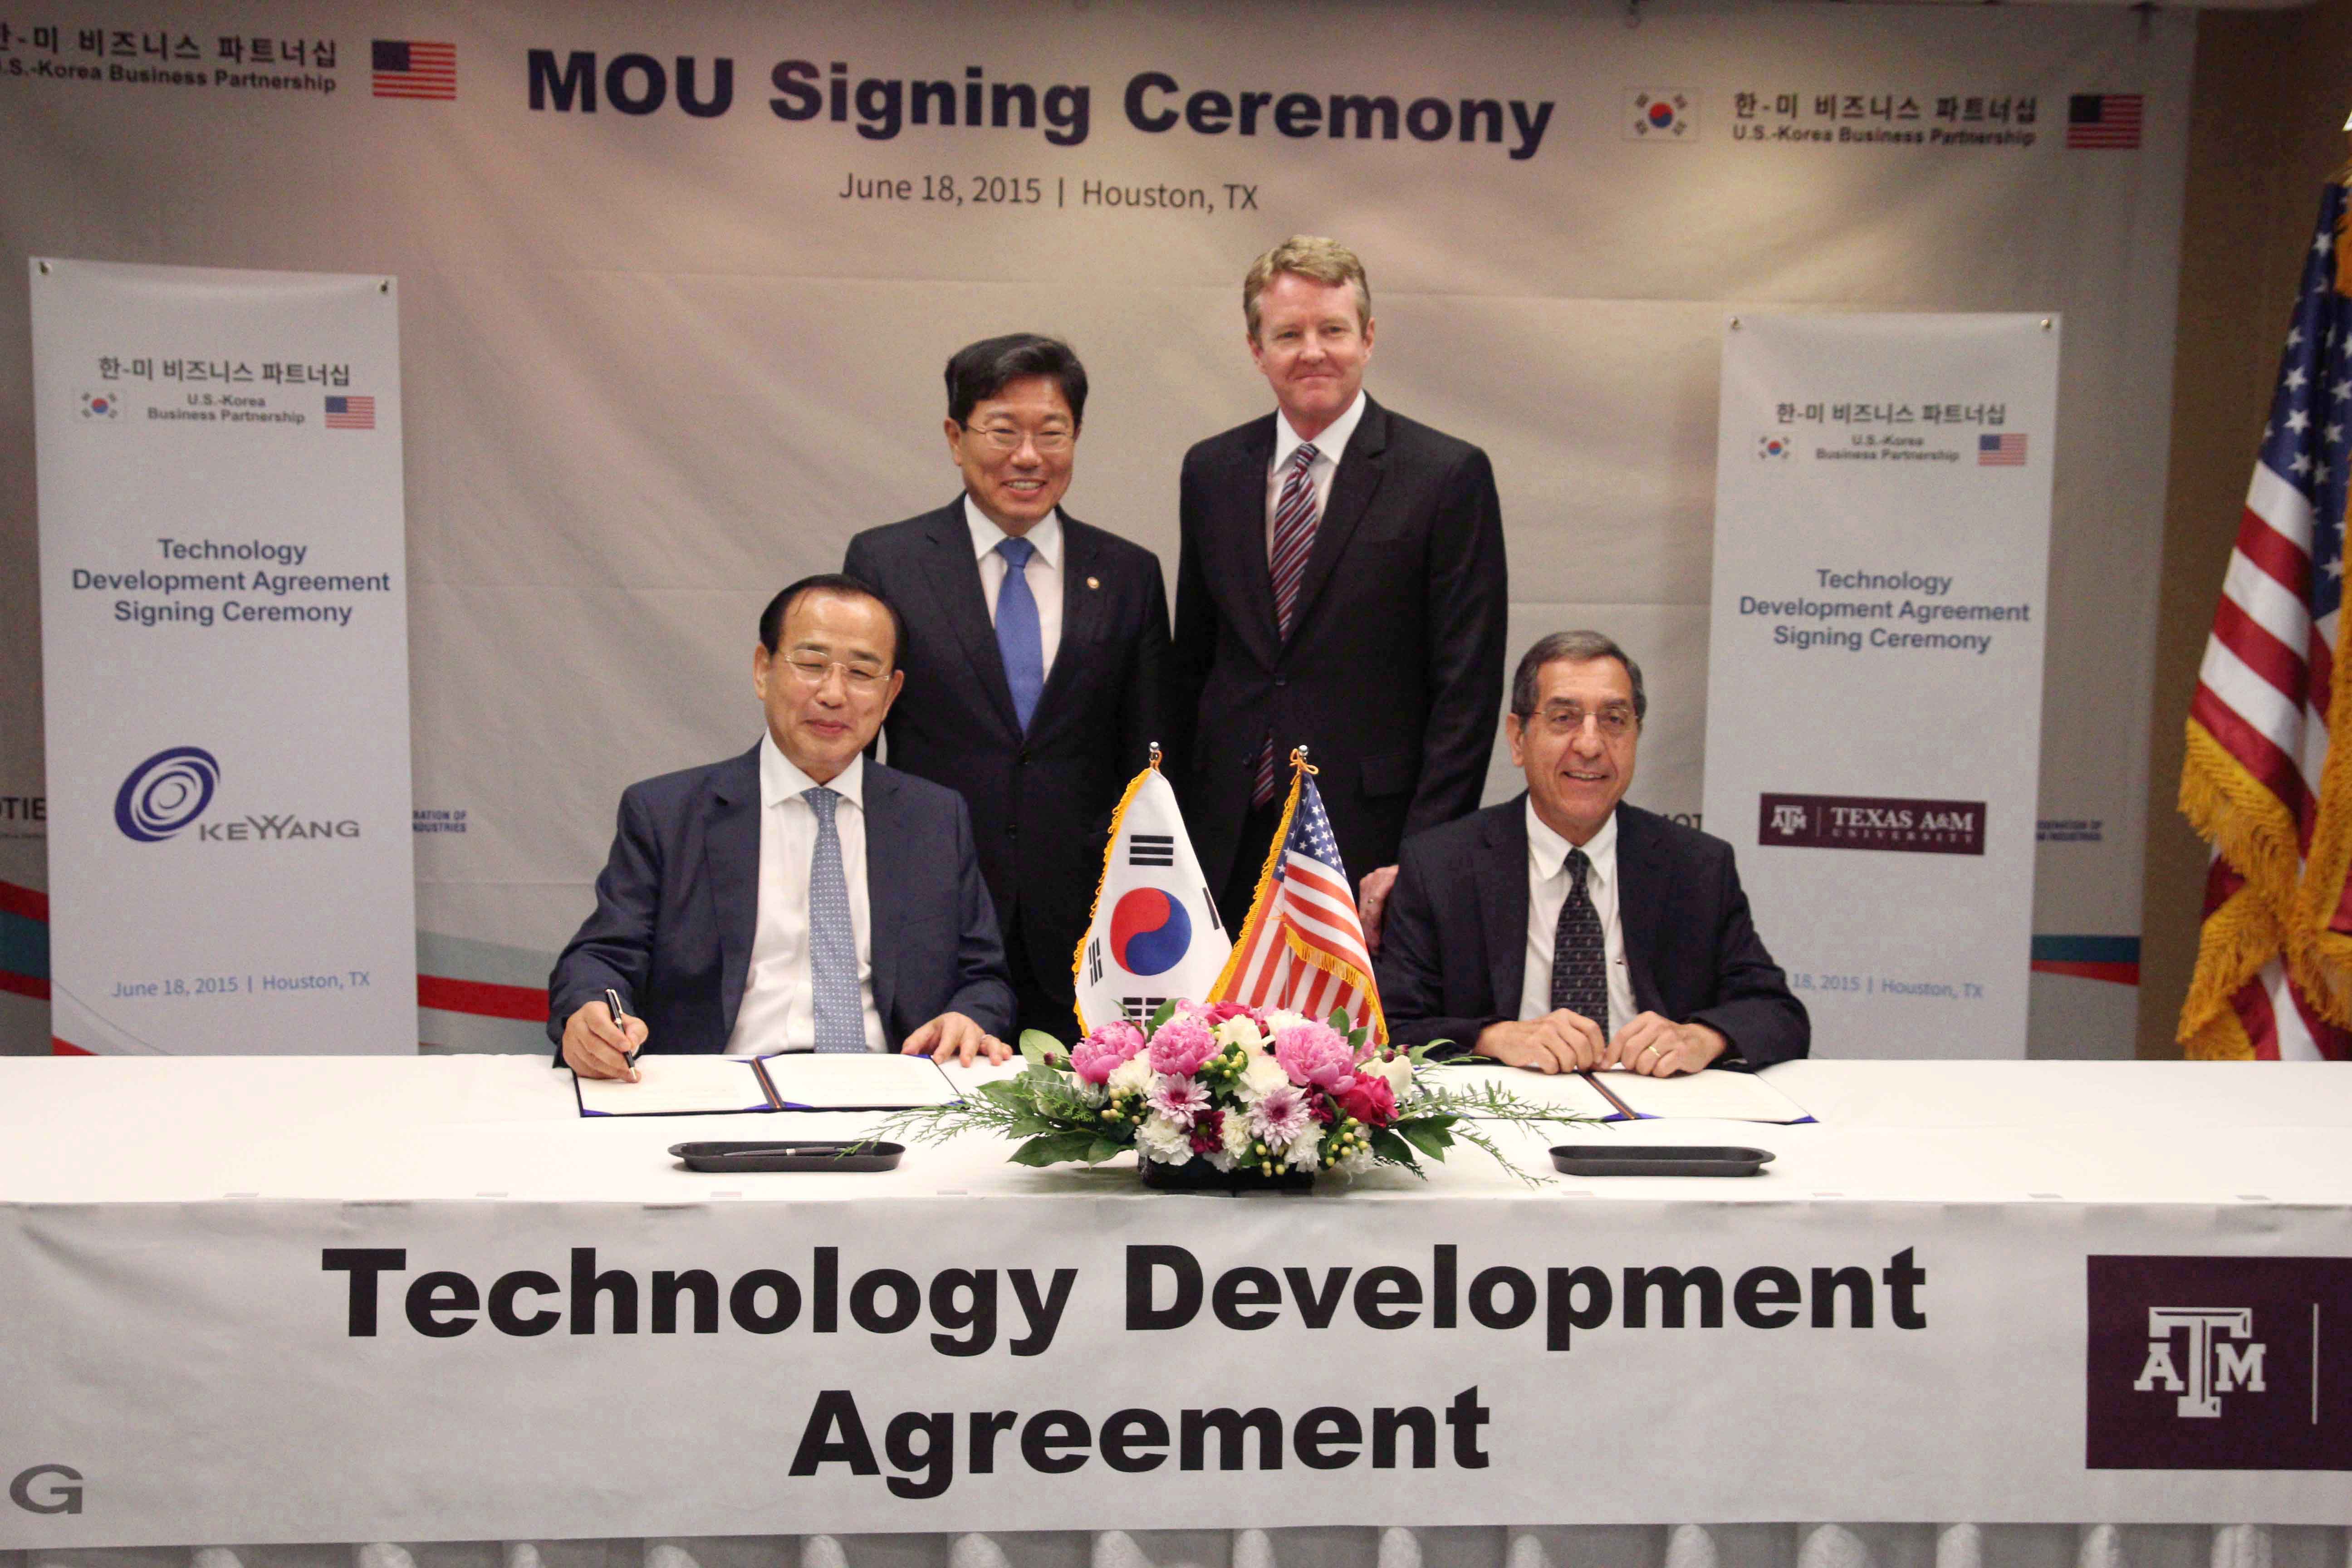 Representatives From Turbo Lab and Korean industry leader Keyyang Signing At A Desk With Words Of MOU Signing Ceremony At The Background And Words Of Technology Development Agreement ATM On The Table